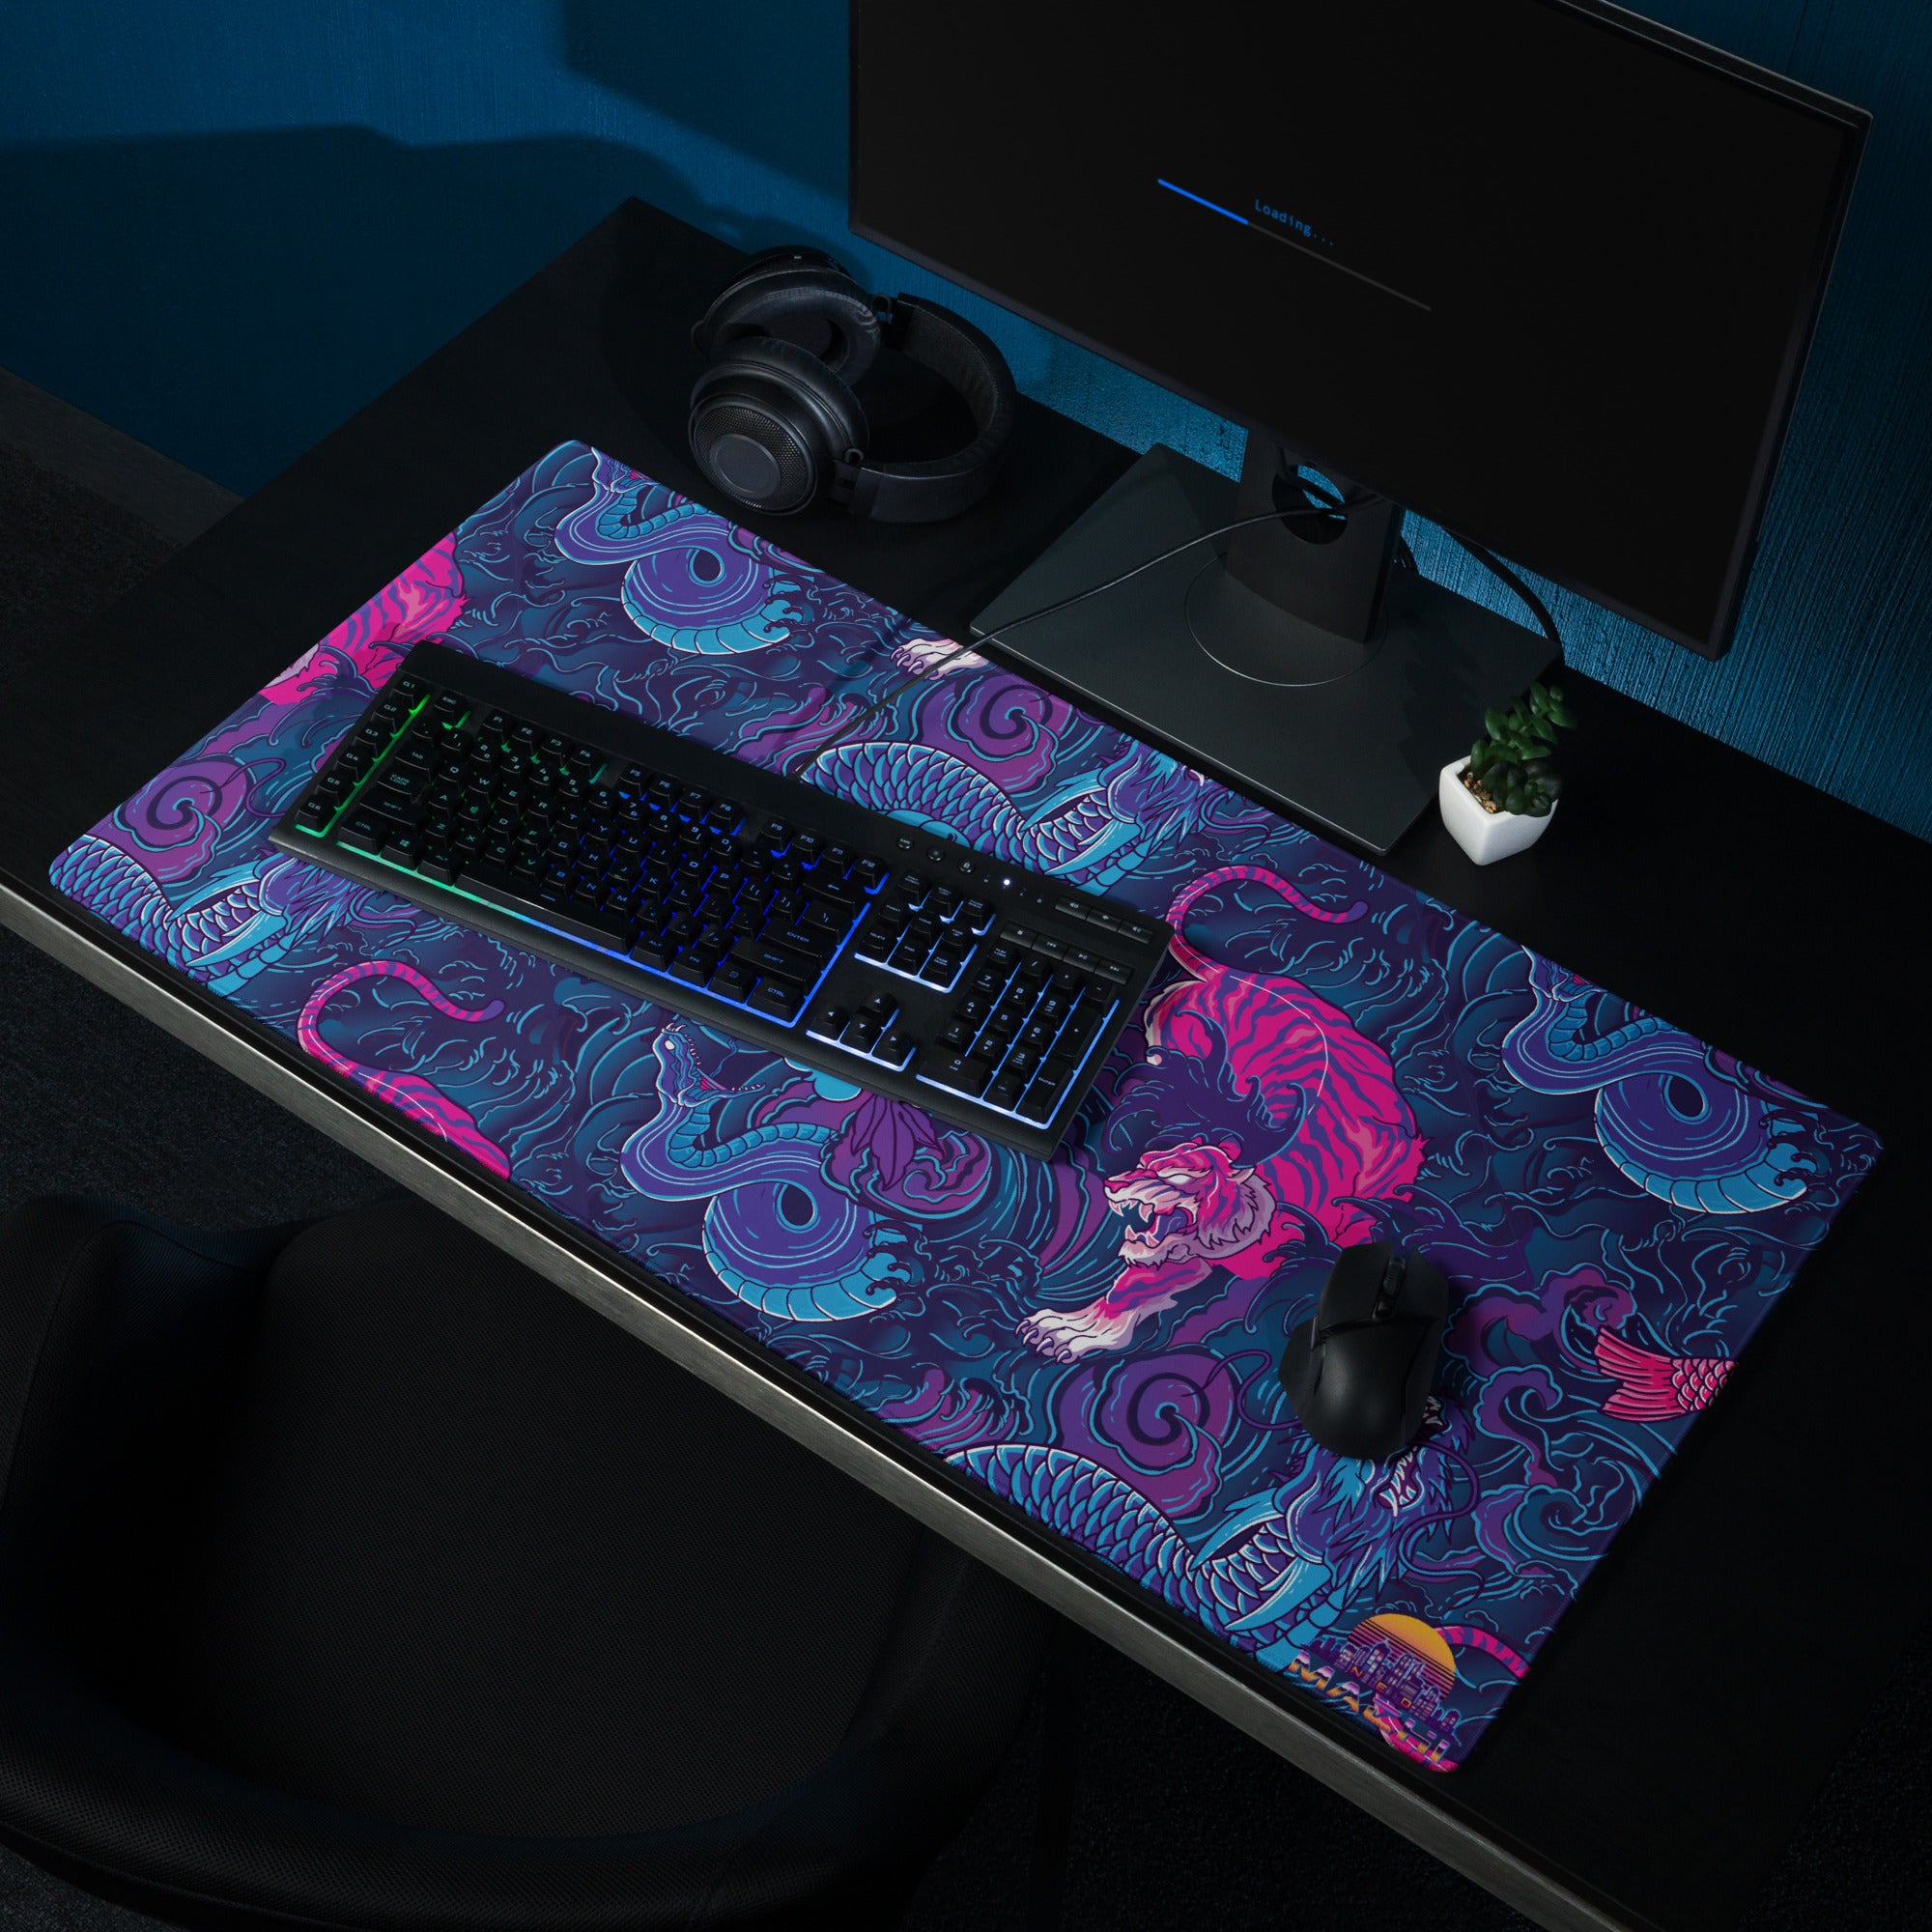 Picture of a IREZUMI neomachi mouse pad lying on a desk